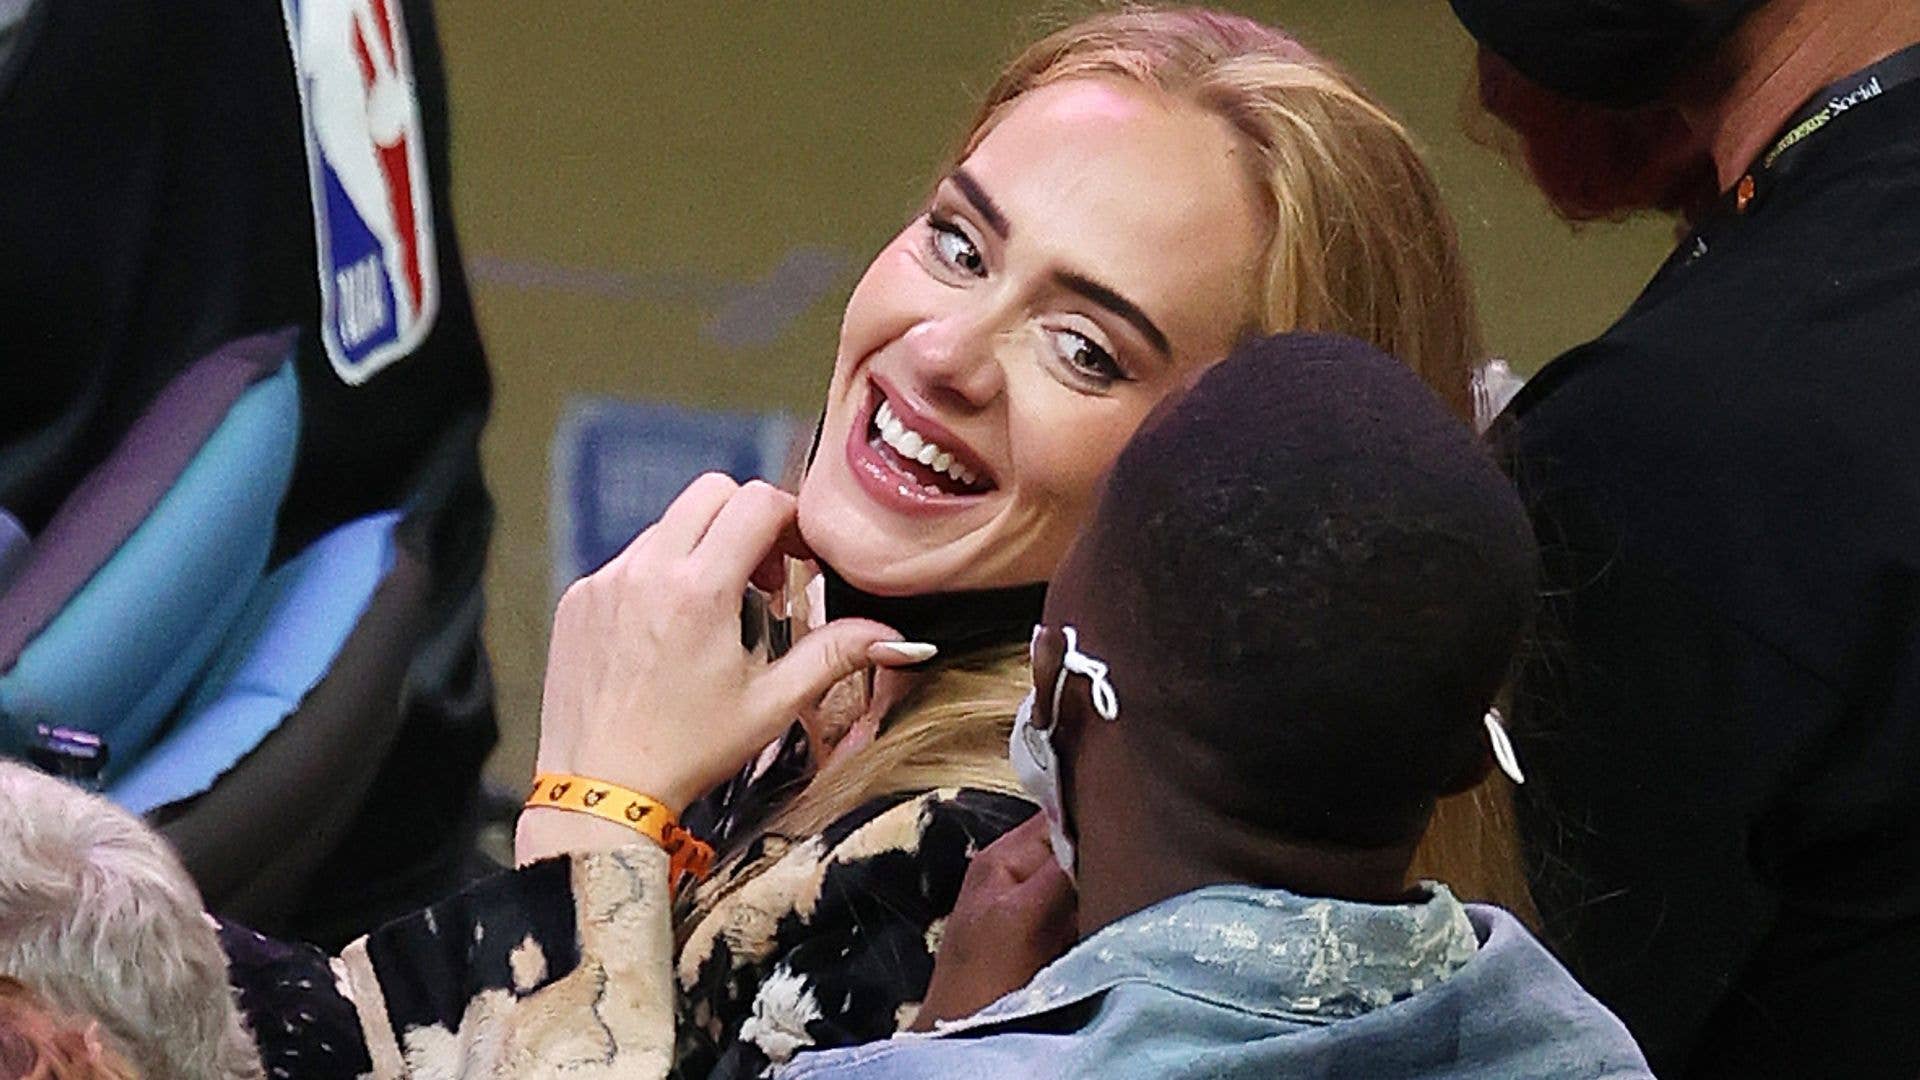 Singer Adele smiles with Rich Paul during the NBA Finals